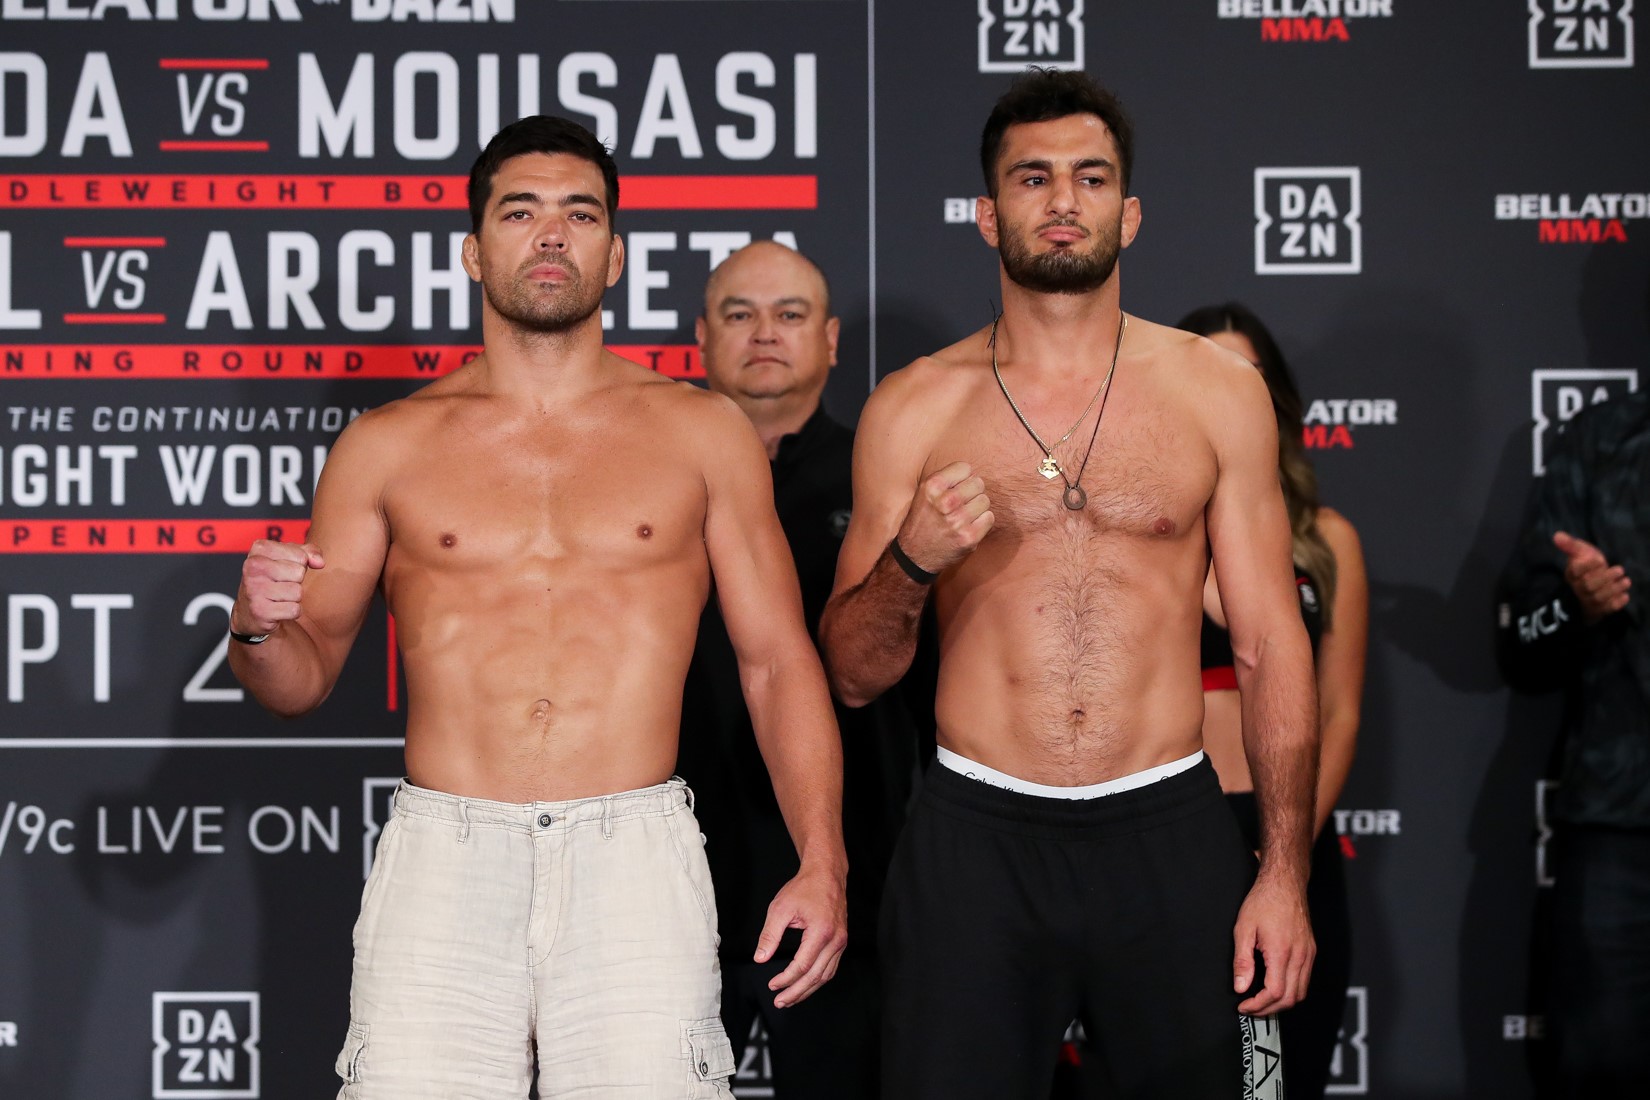 Bellator 228 weigh-in results from Inglewood, California